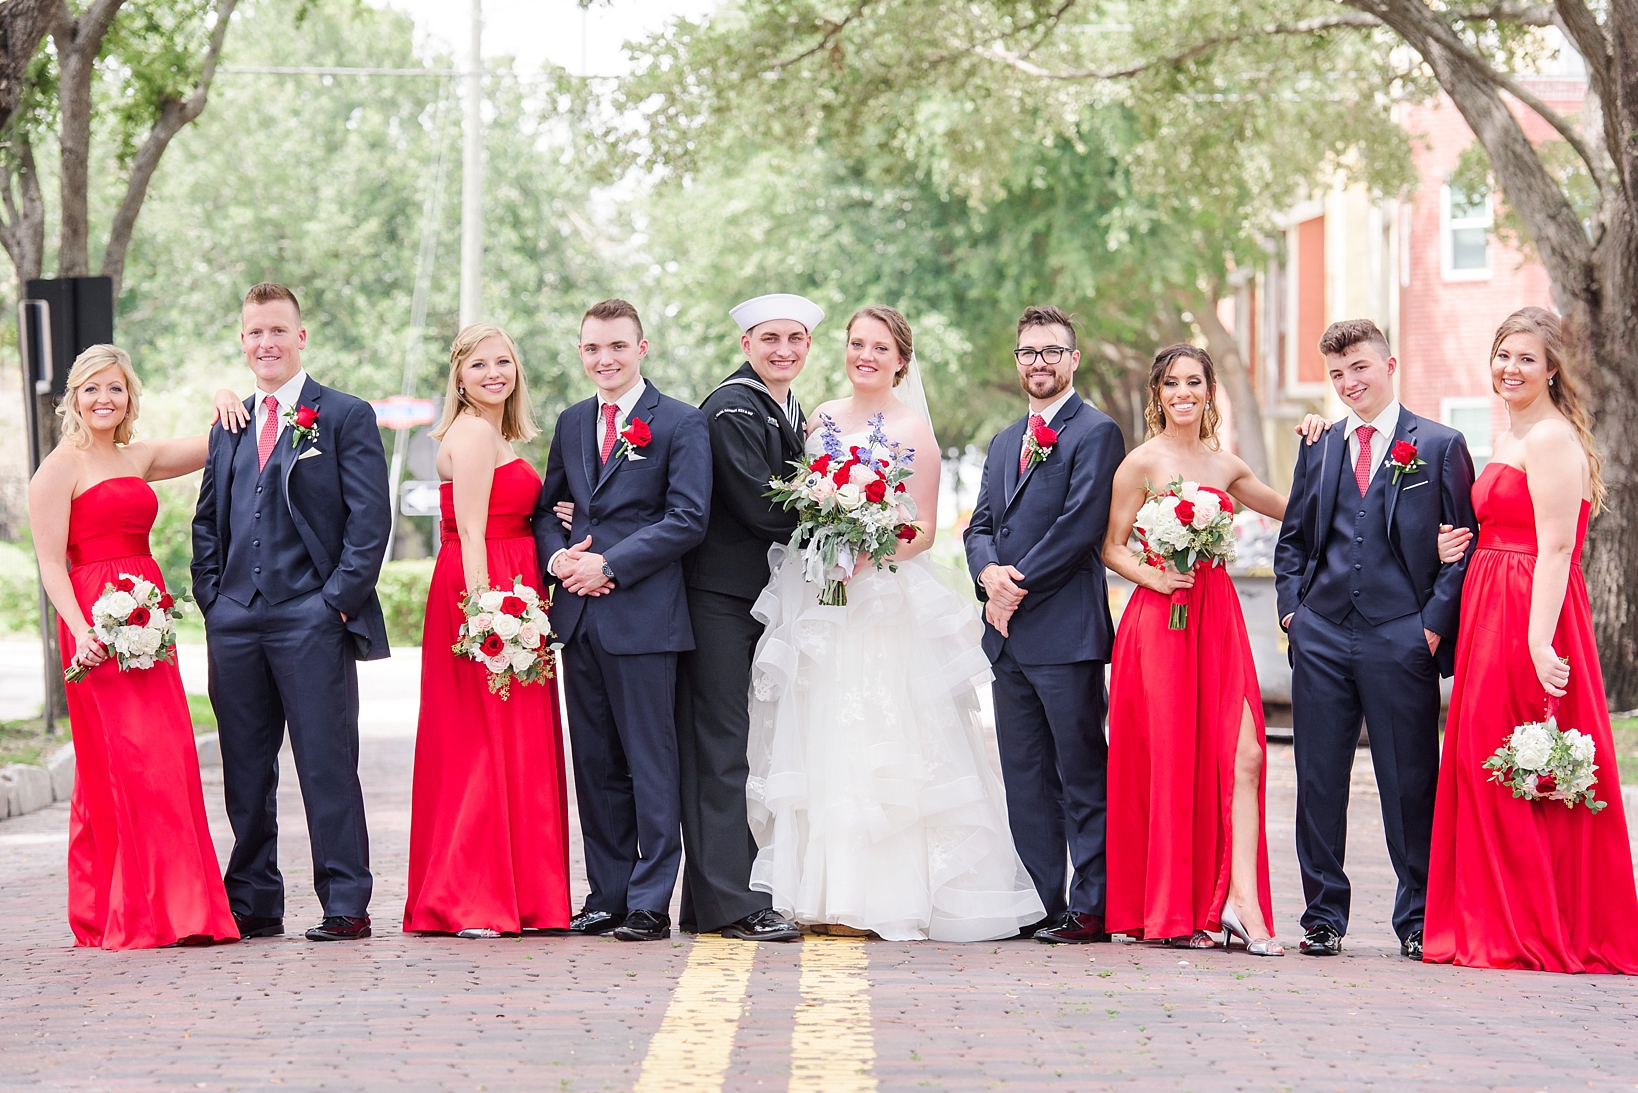 The wedding party on the brick streets of Ybor City in their red dresses and navy suits